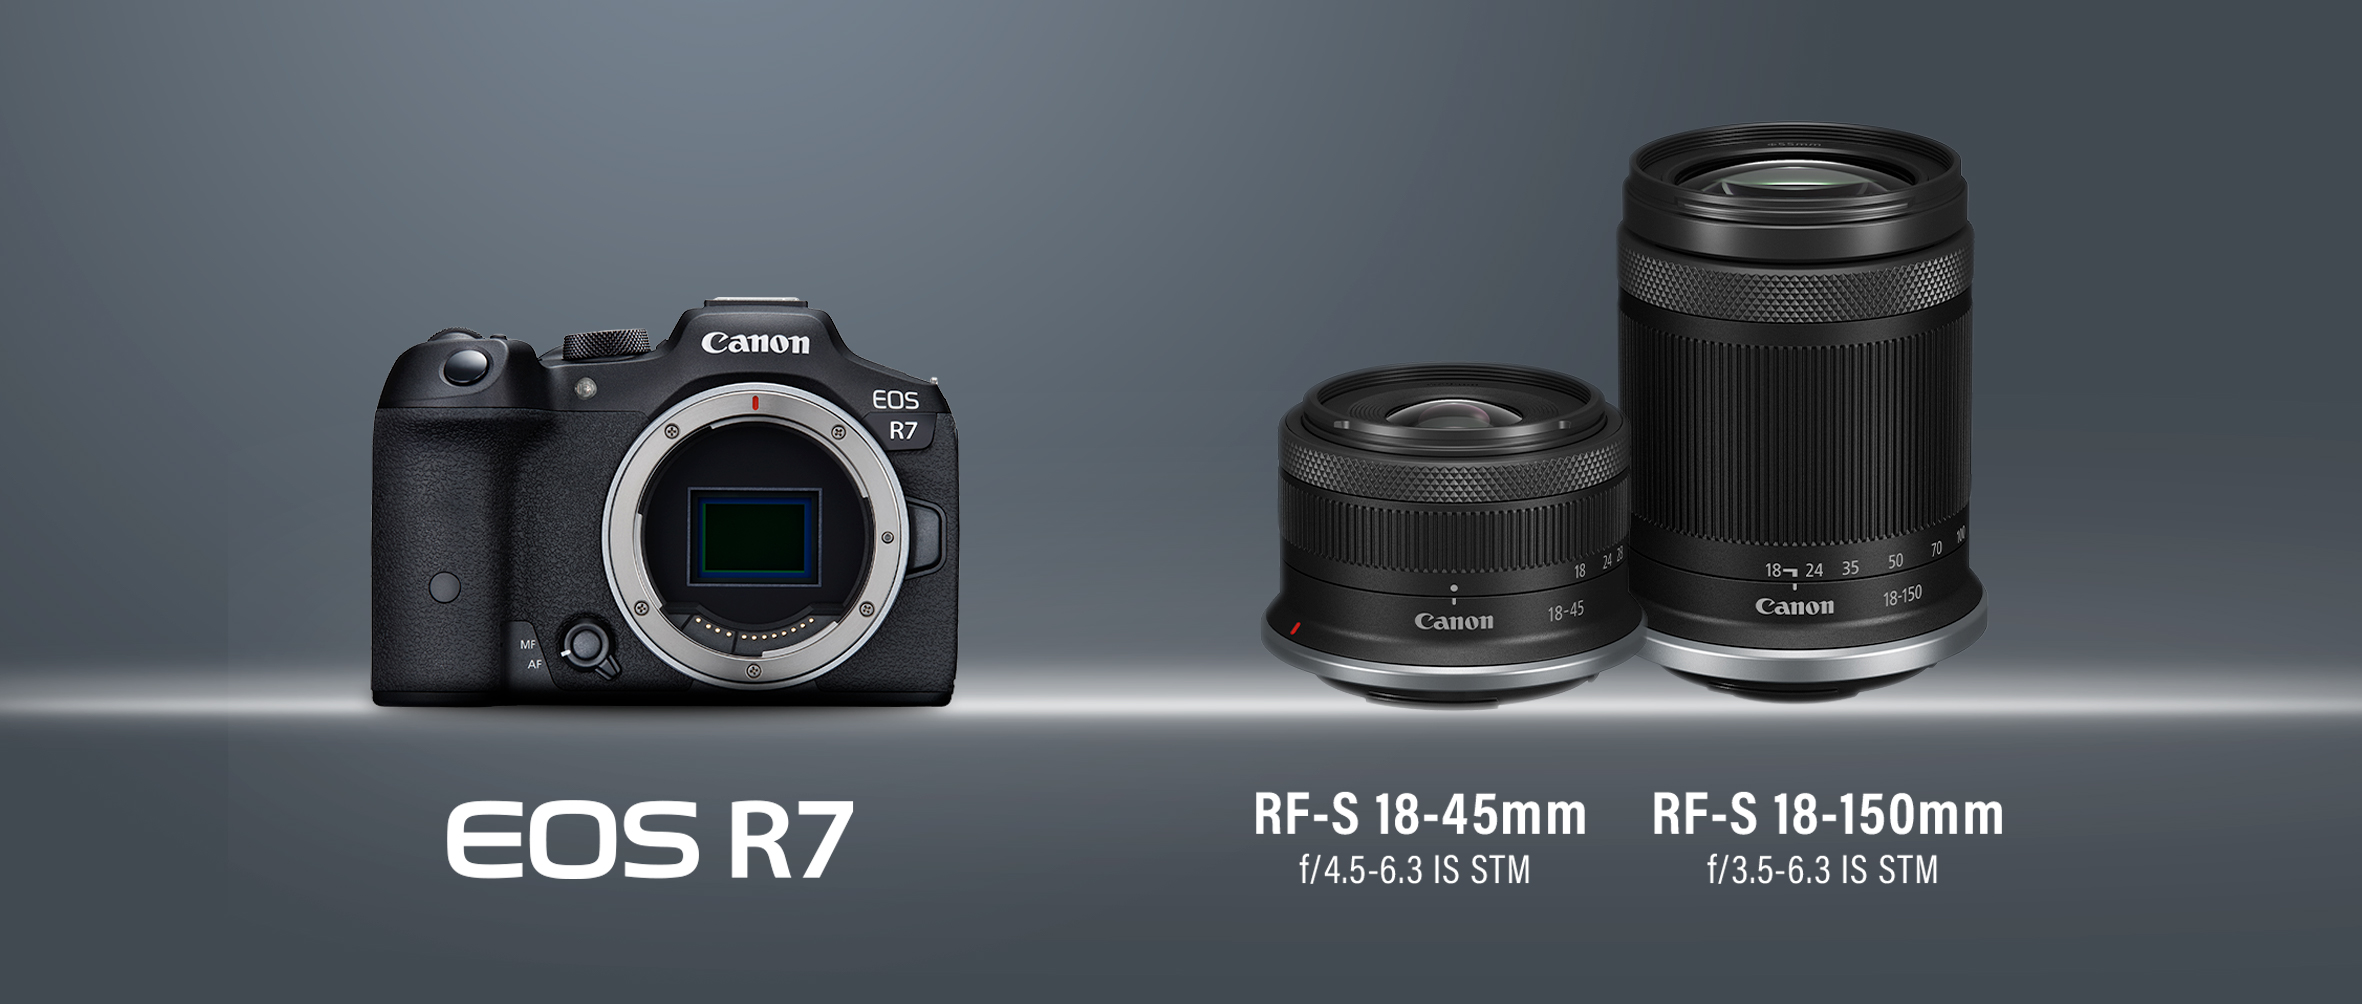 Which Canon APS-C Mirrorless Camera is for You? The EOS R7 or EOS R10?